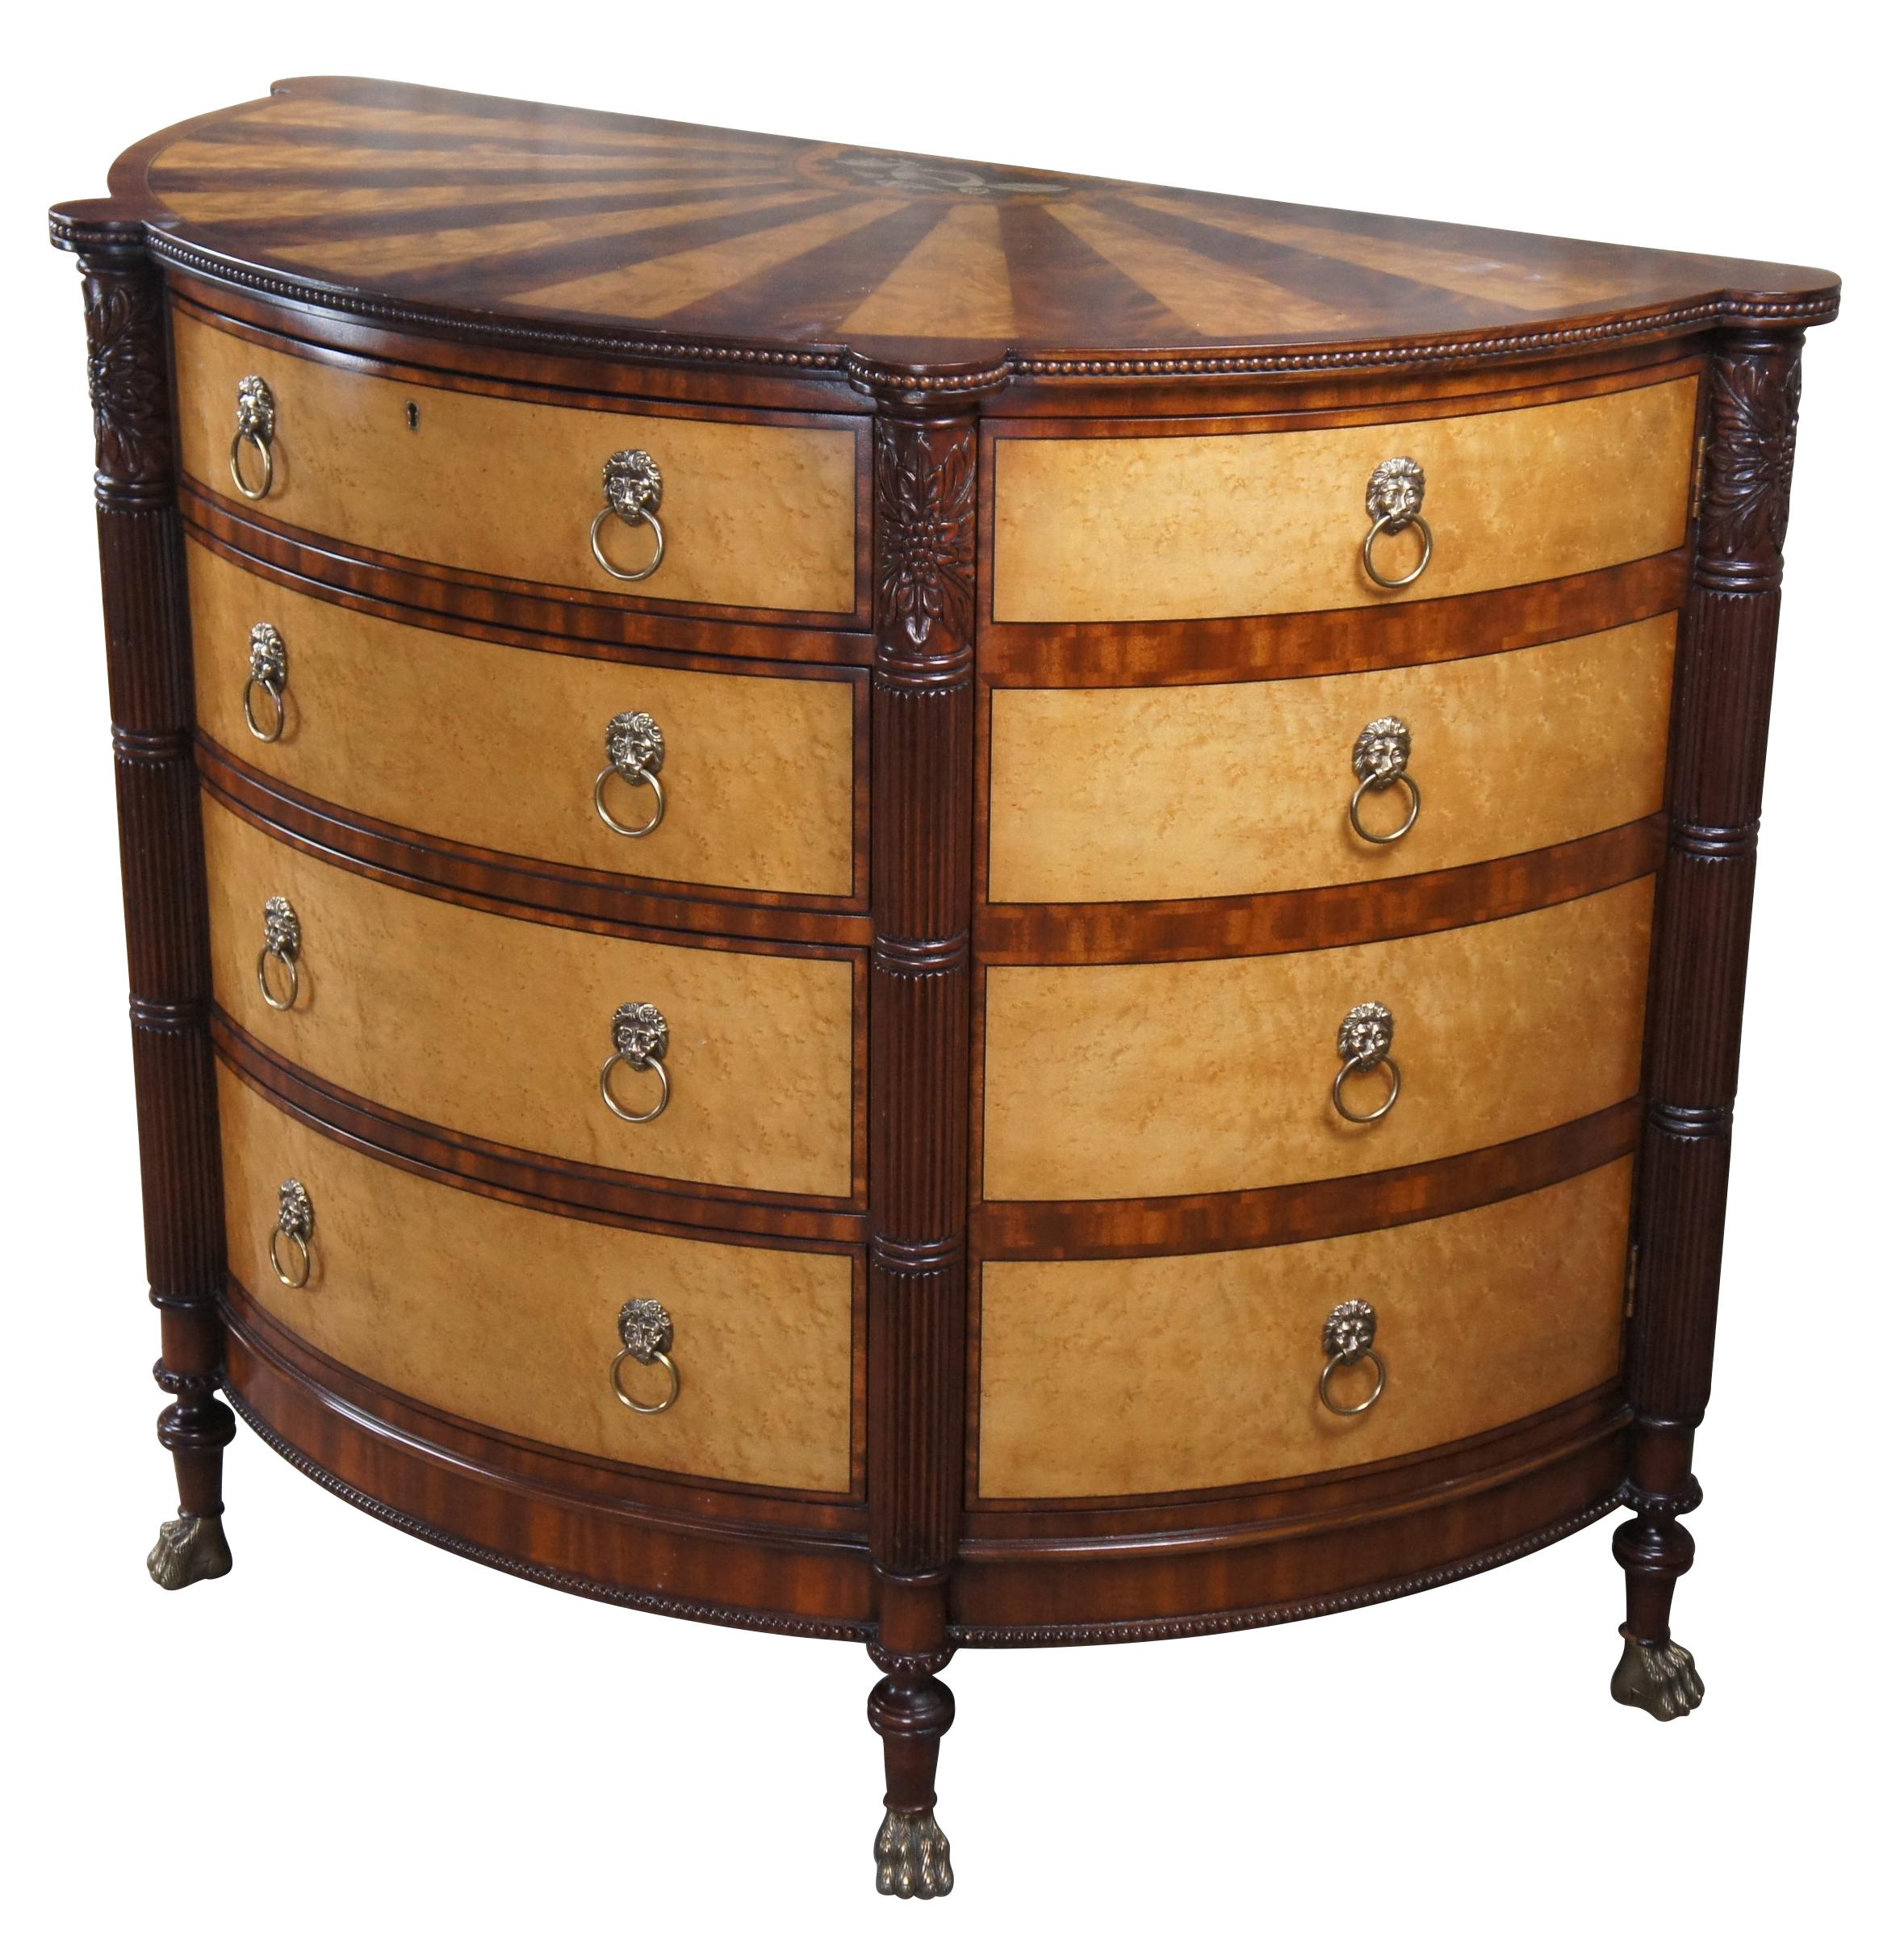 A rare and impressive commode by Harold Ionson. Made of birdseye maple, satinwood and Honduras mahogany, featuring a half round / bow front with four drawers, two side cabinets, brass paw / claw feet and superb sunburst / starburst top with nautical